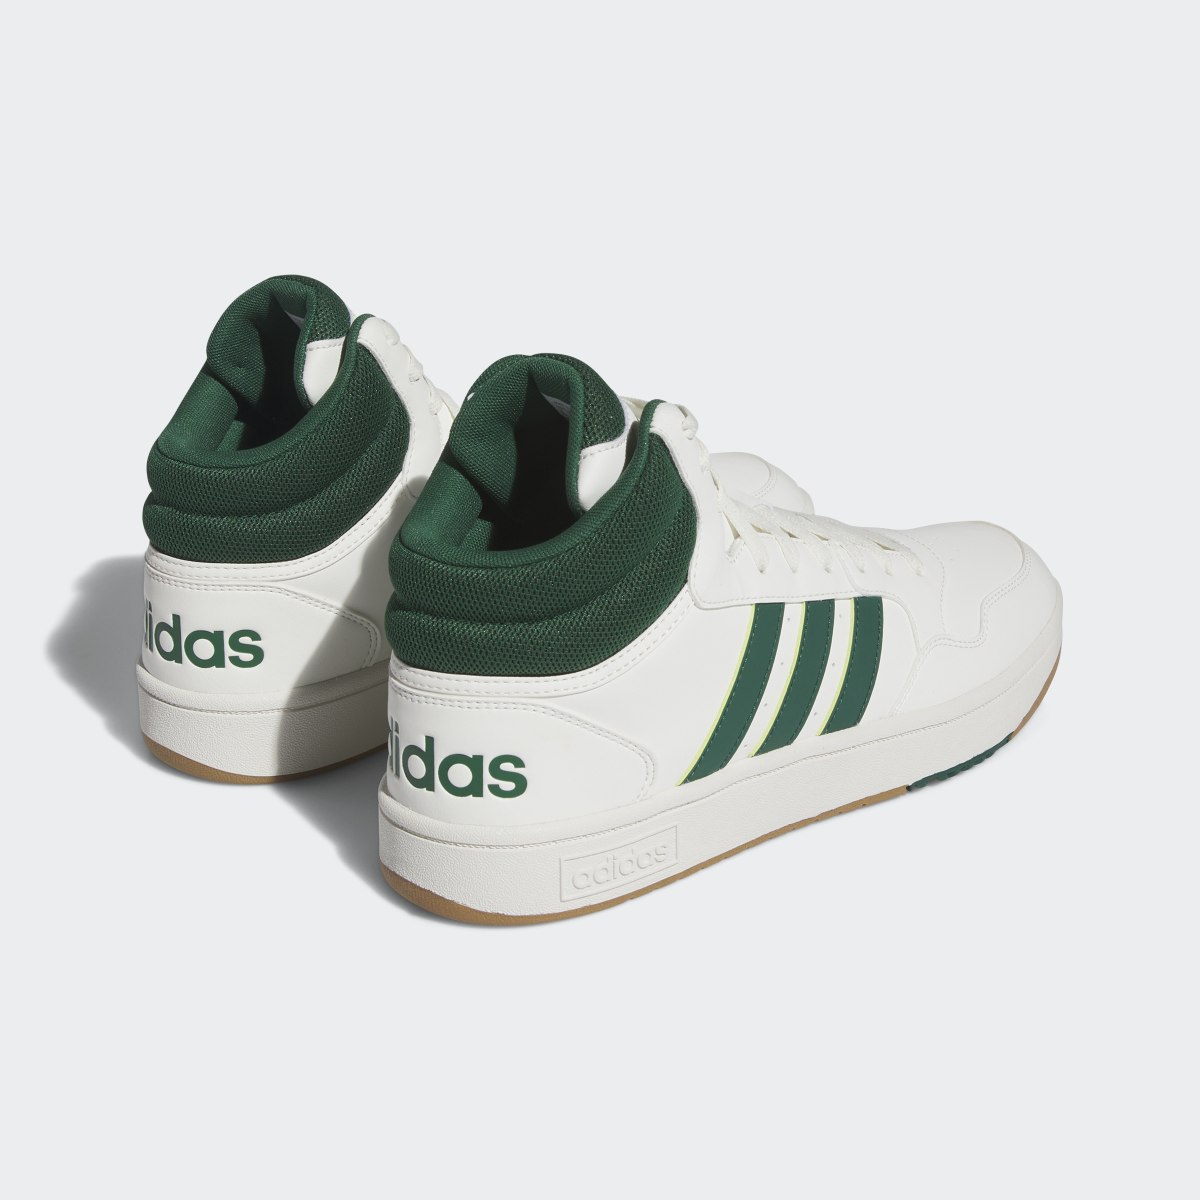 Adidas Hoops 3.0 Mid Lifestyle Basketball Classic Vintage Schuh. 6